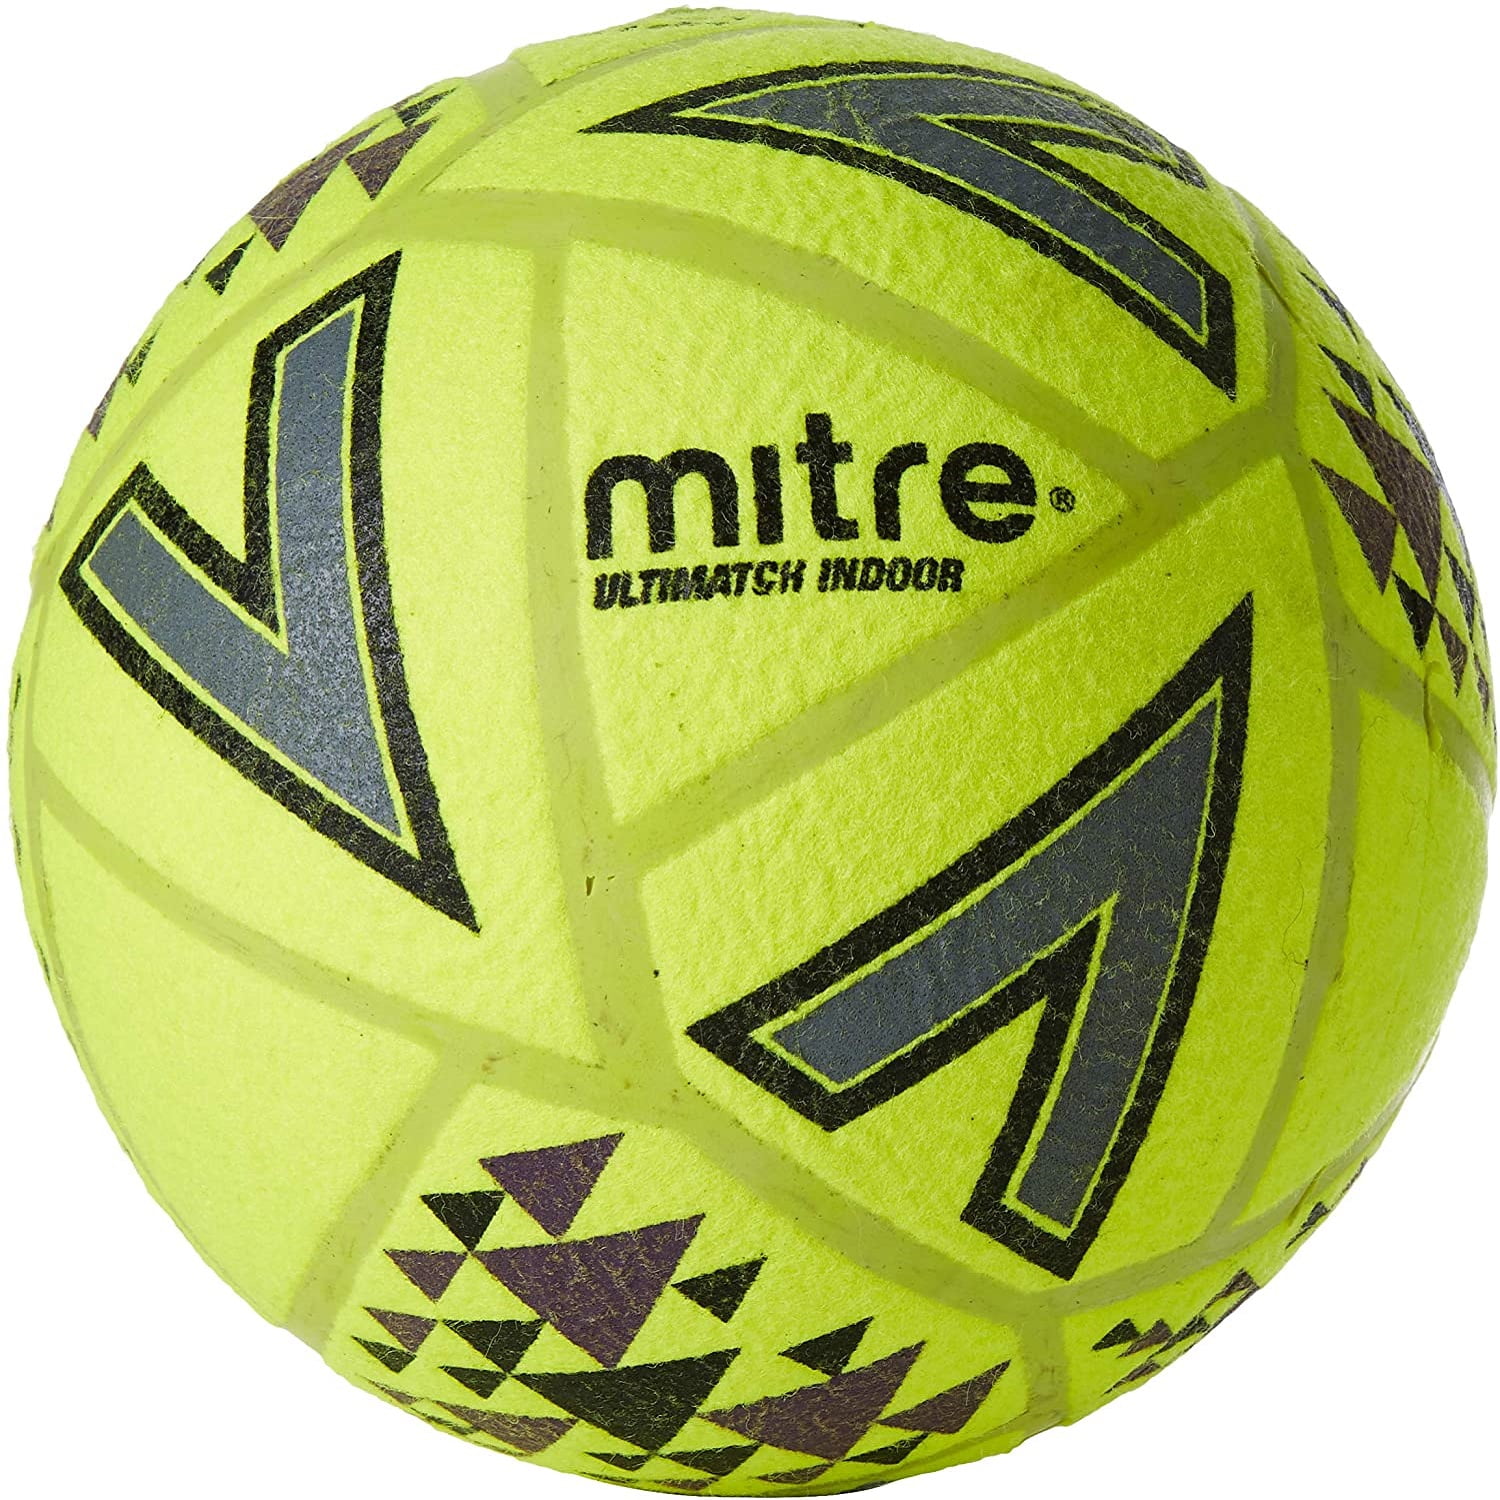 Mitre Ultimatch Indoor Football Soccer Ball Fluo Yellow Size 4 Or 5 